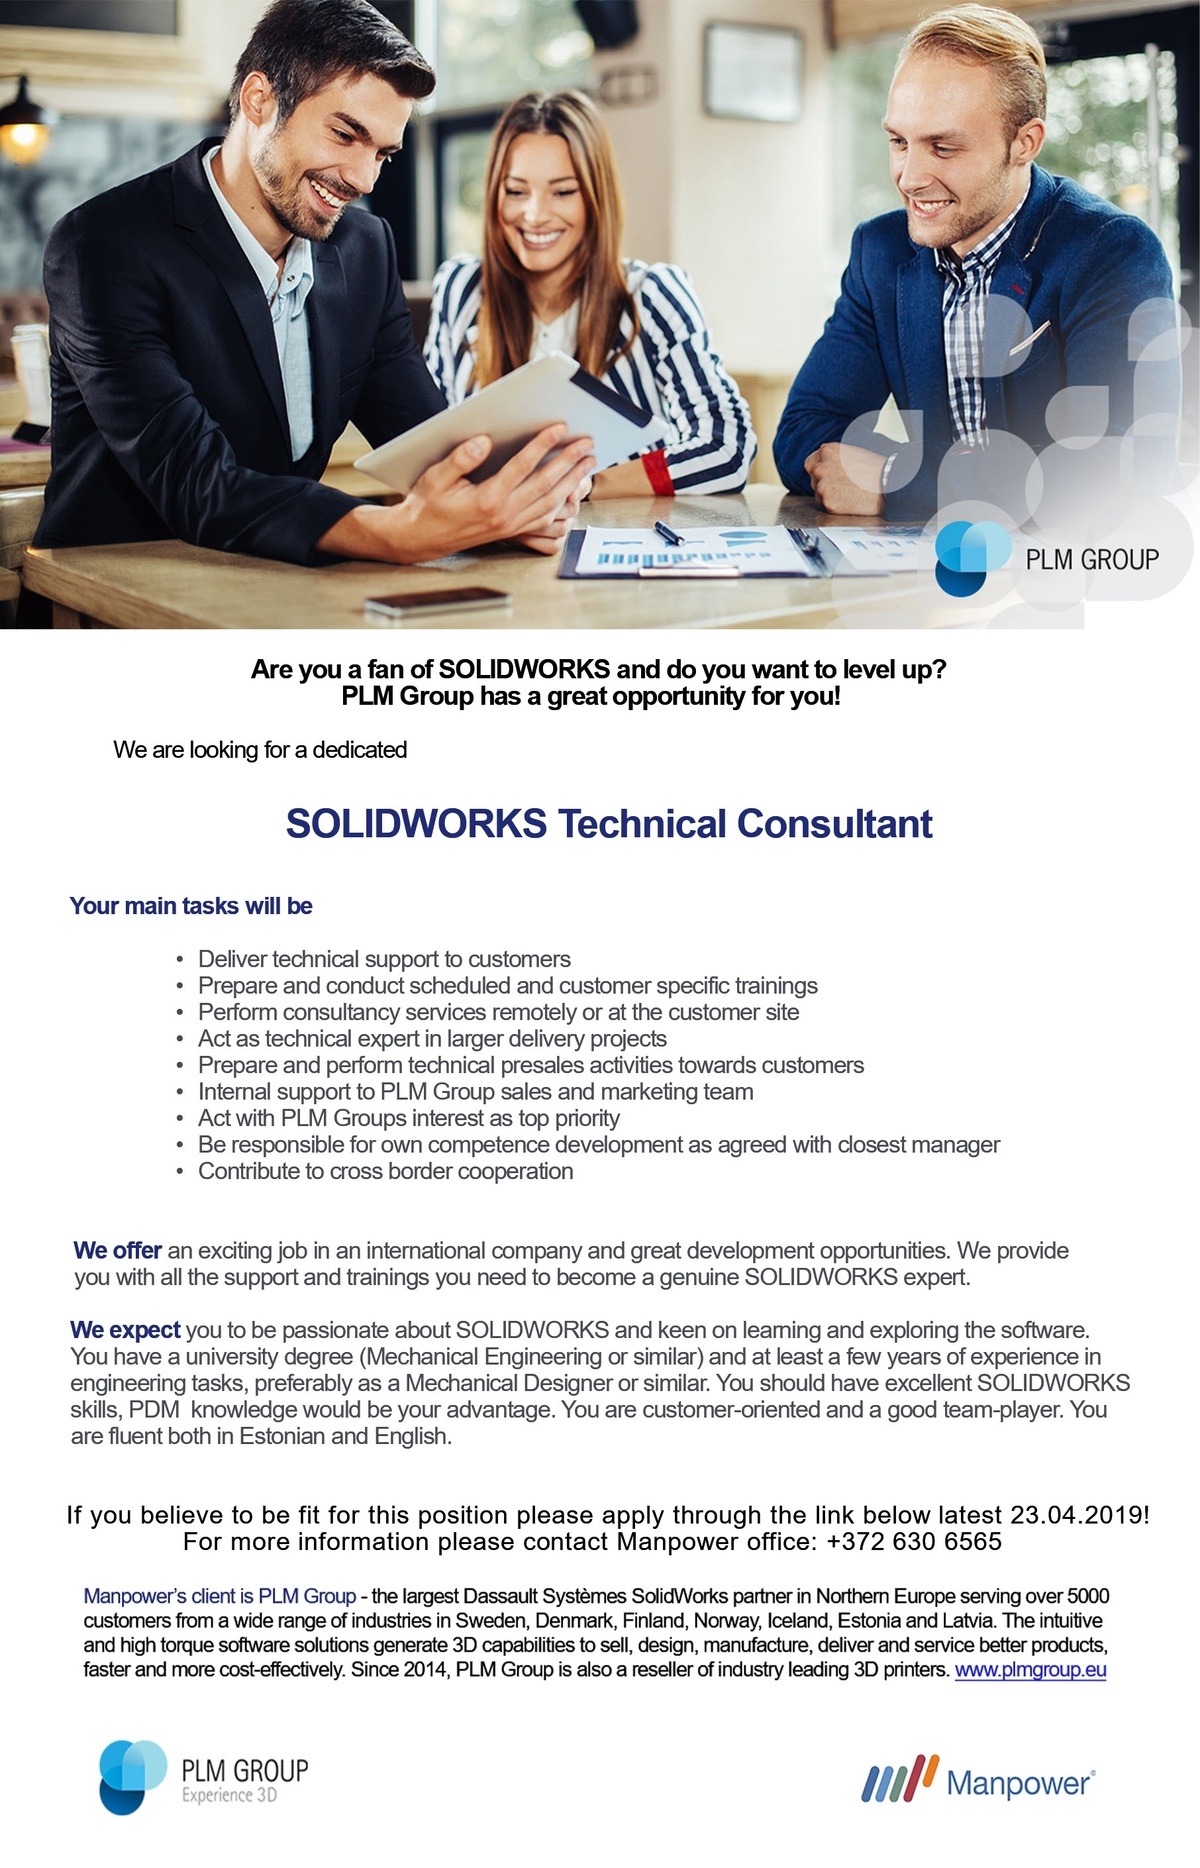 Manpower OÜ SOLIDWORKS Technical Consultant